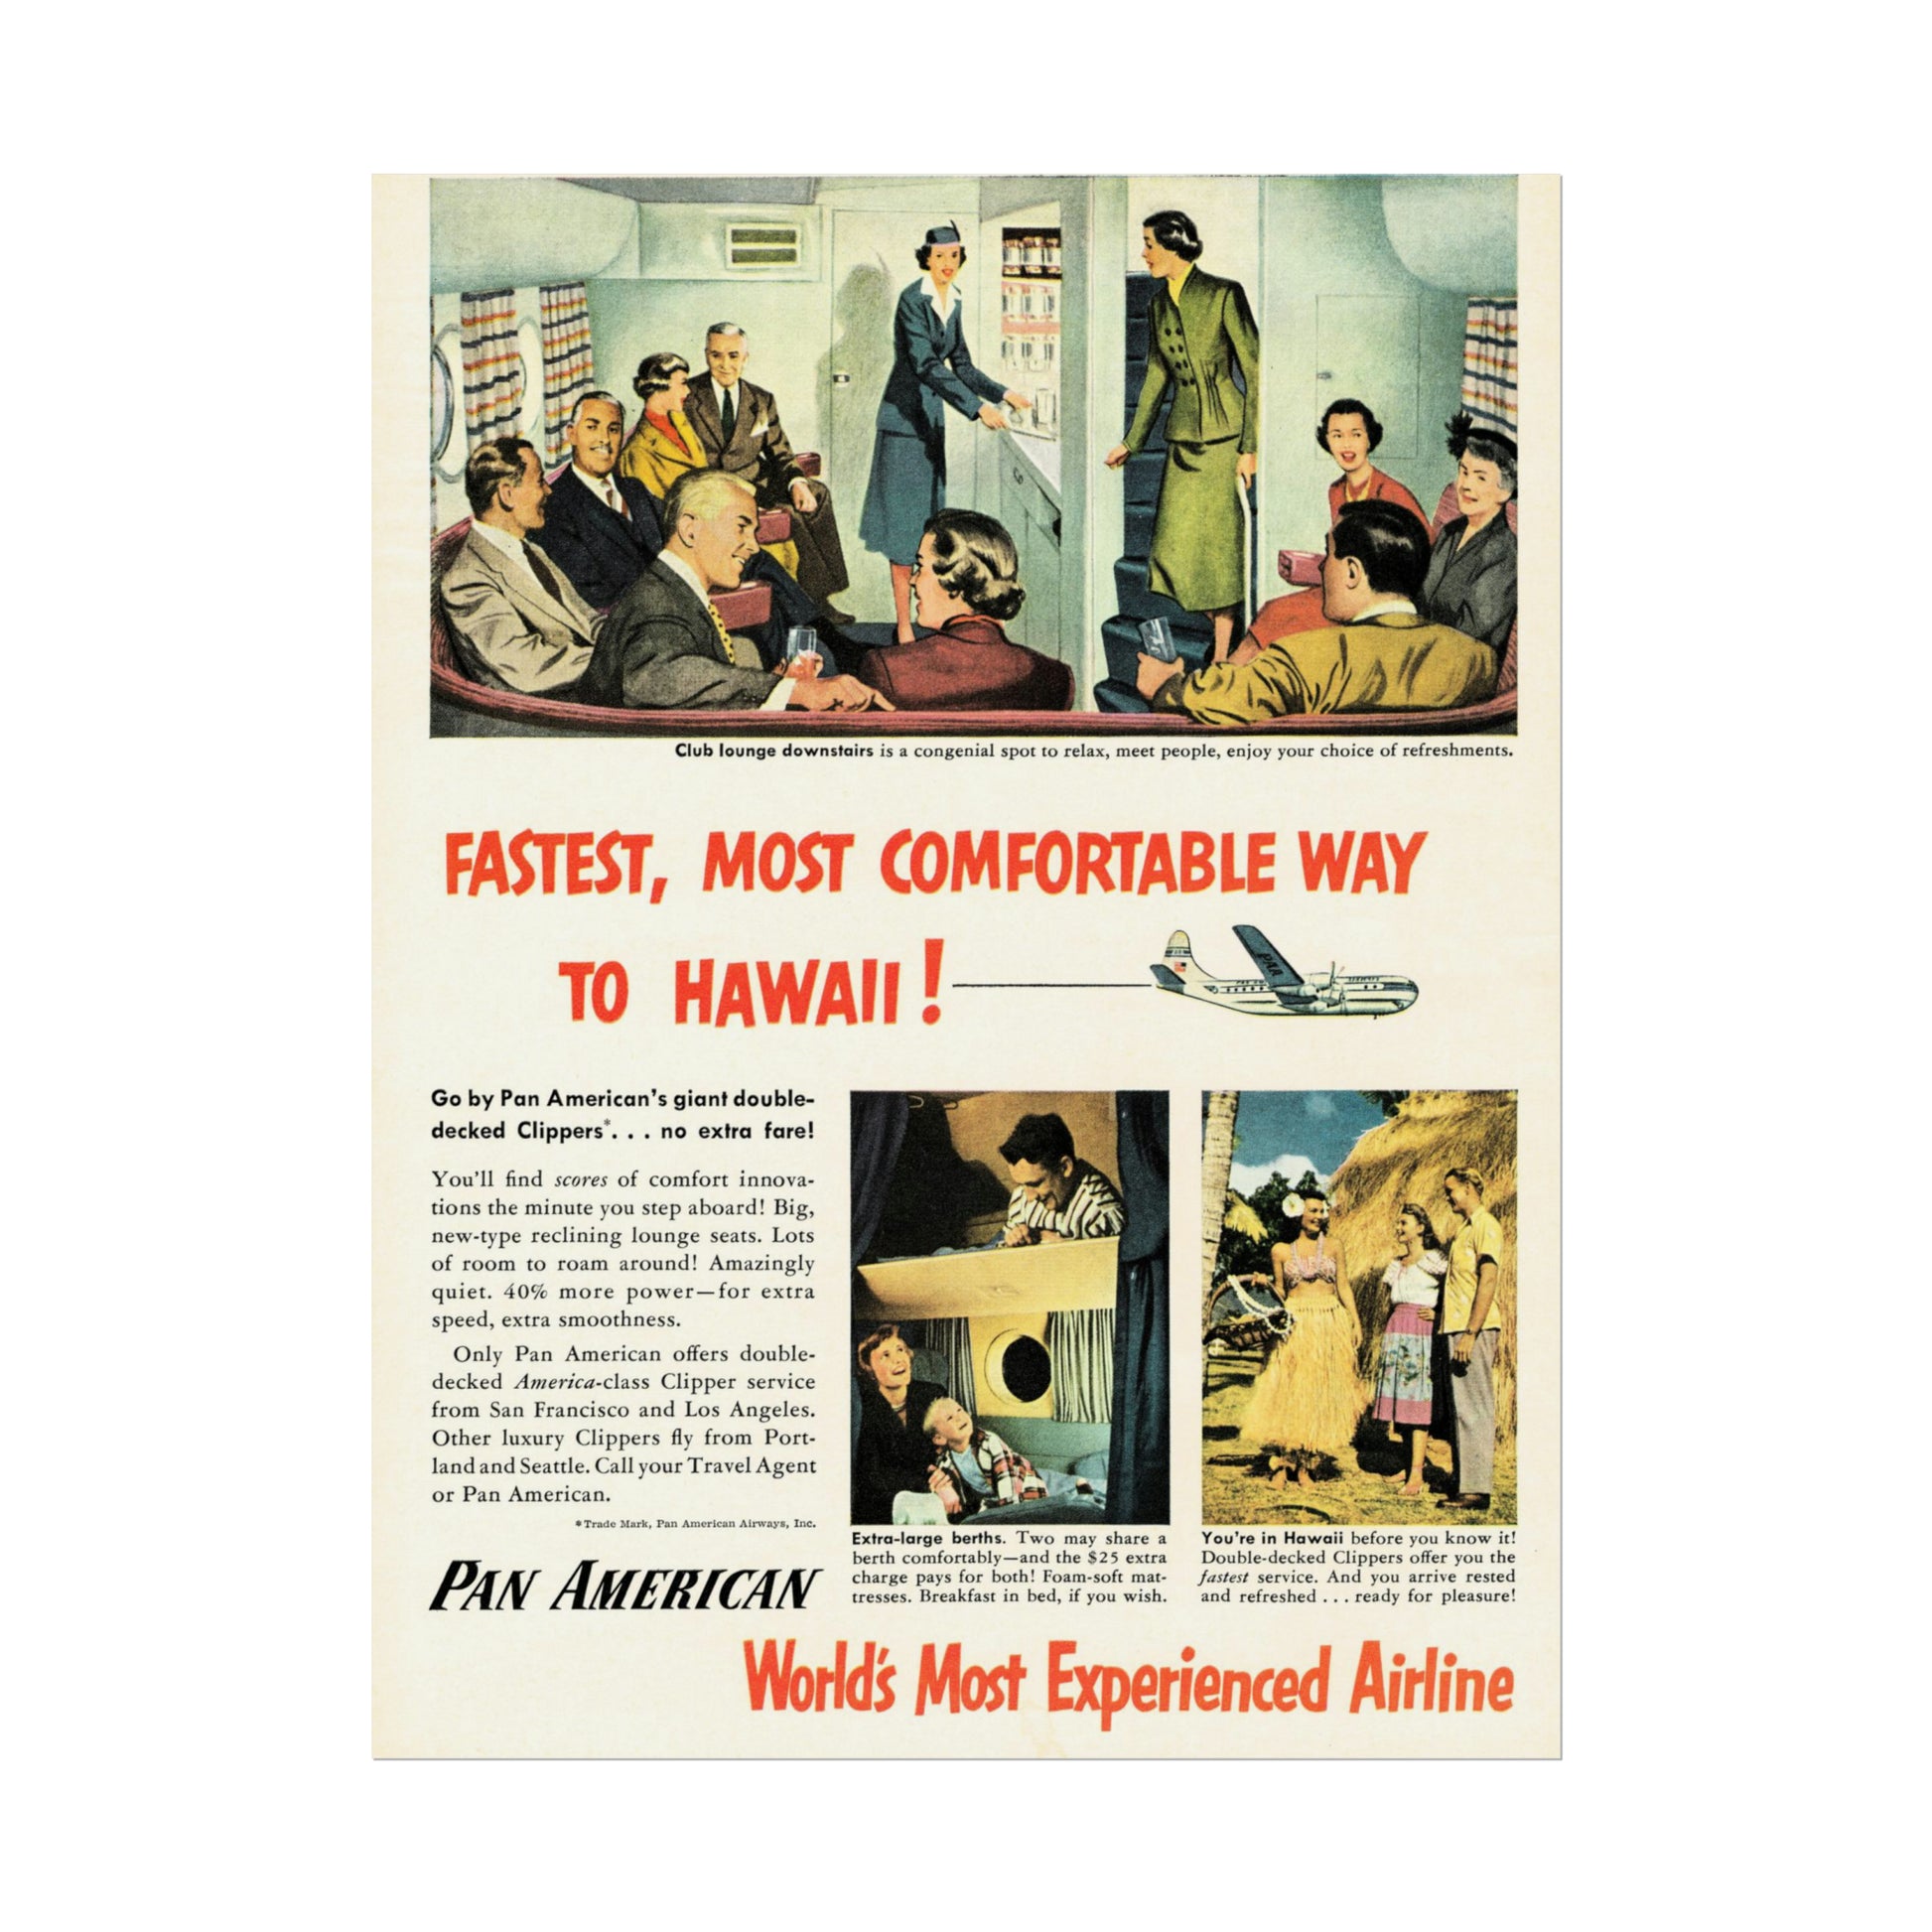 Vintage Pan American airline poster advertising flights to Hawaii, showcasing passengers in a plane's lounge and the Clipper aircraft.